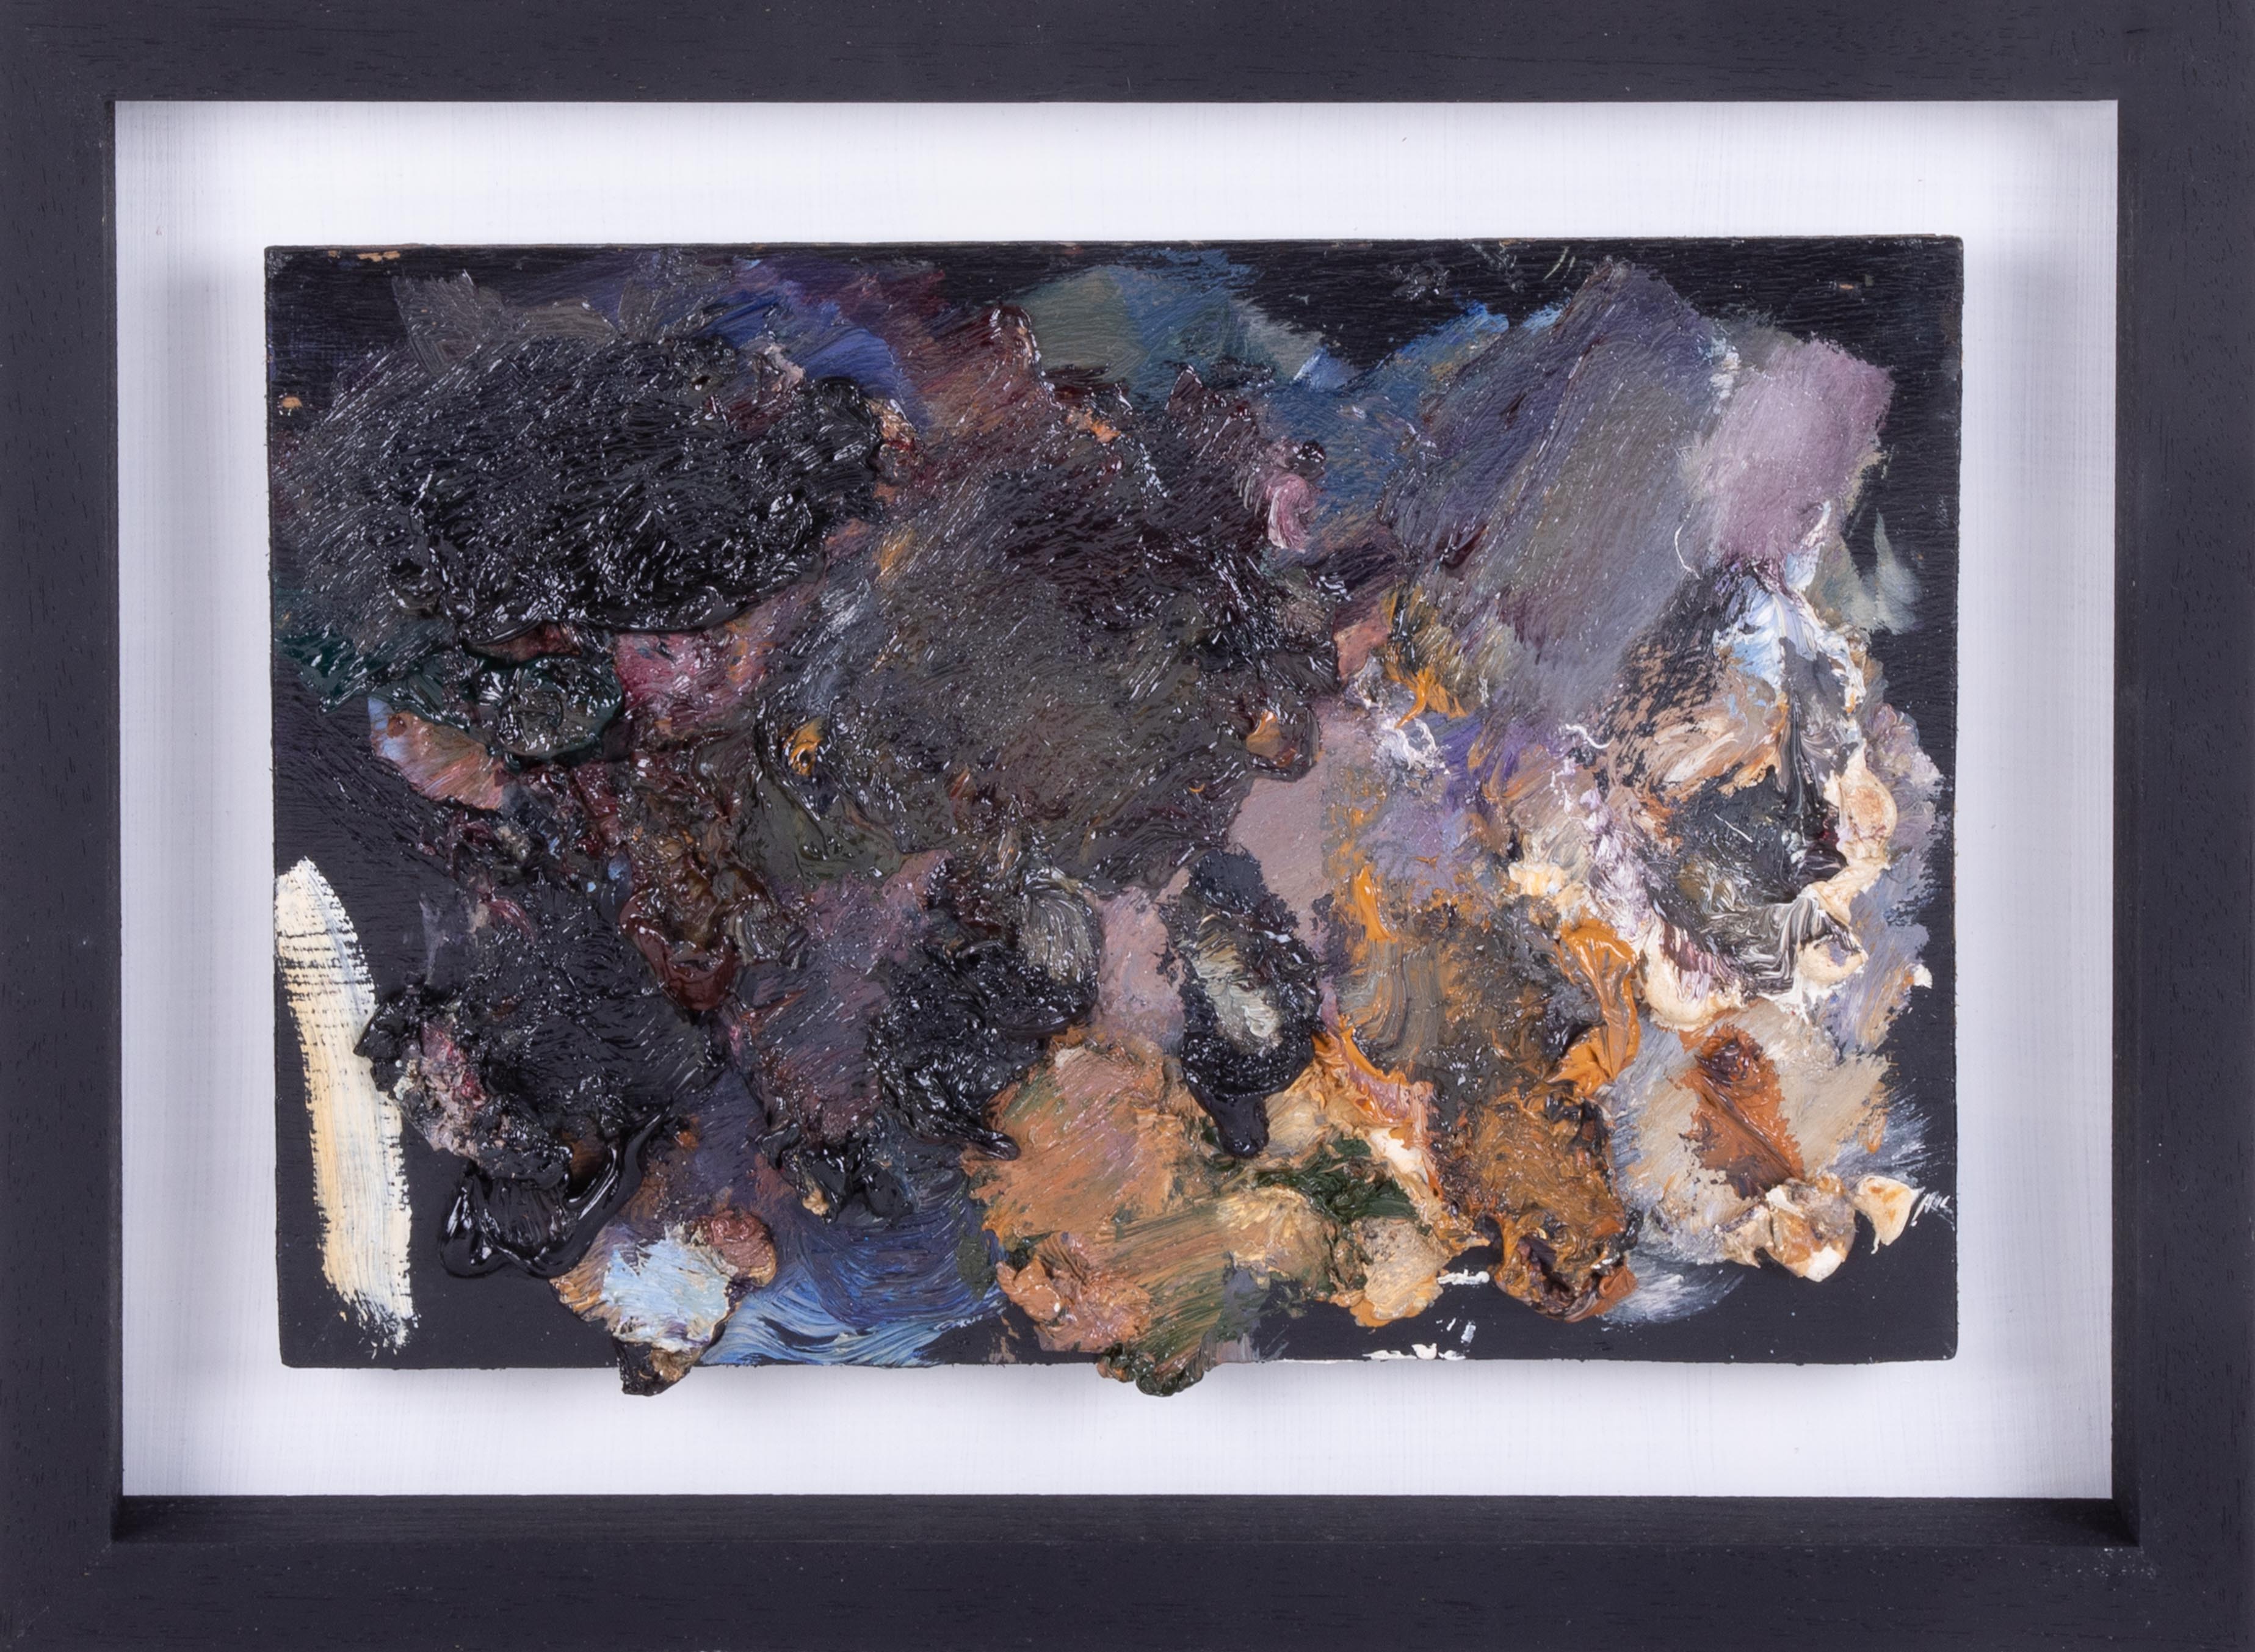 An original artist palette recovered from the studio of Robert Lenkiewicz cleaned, restored